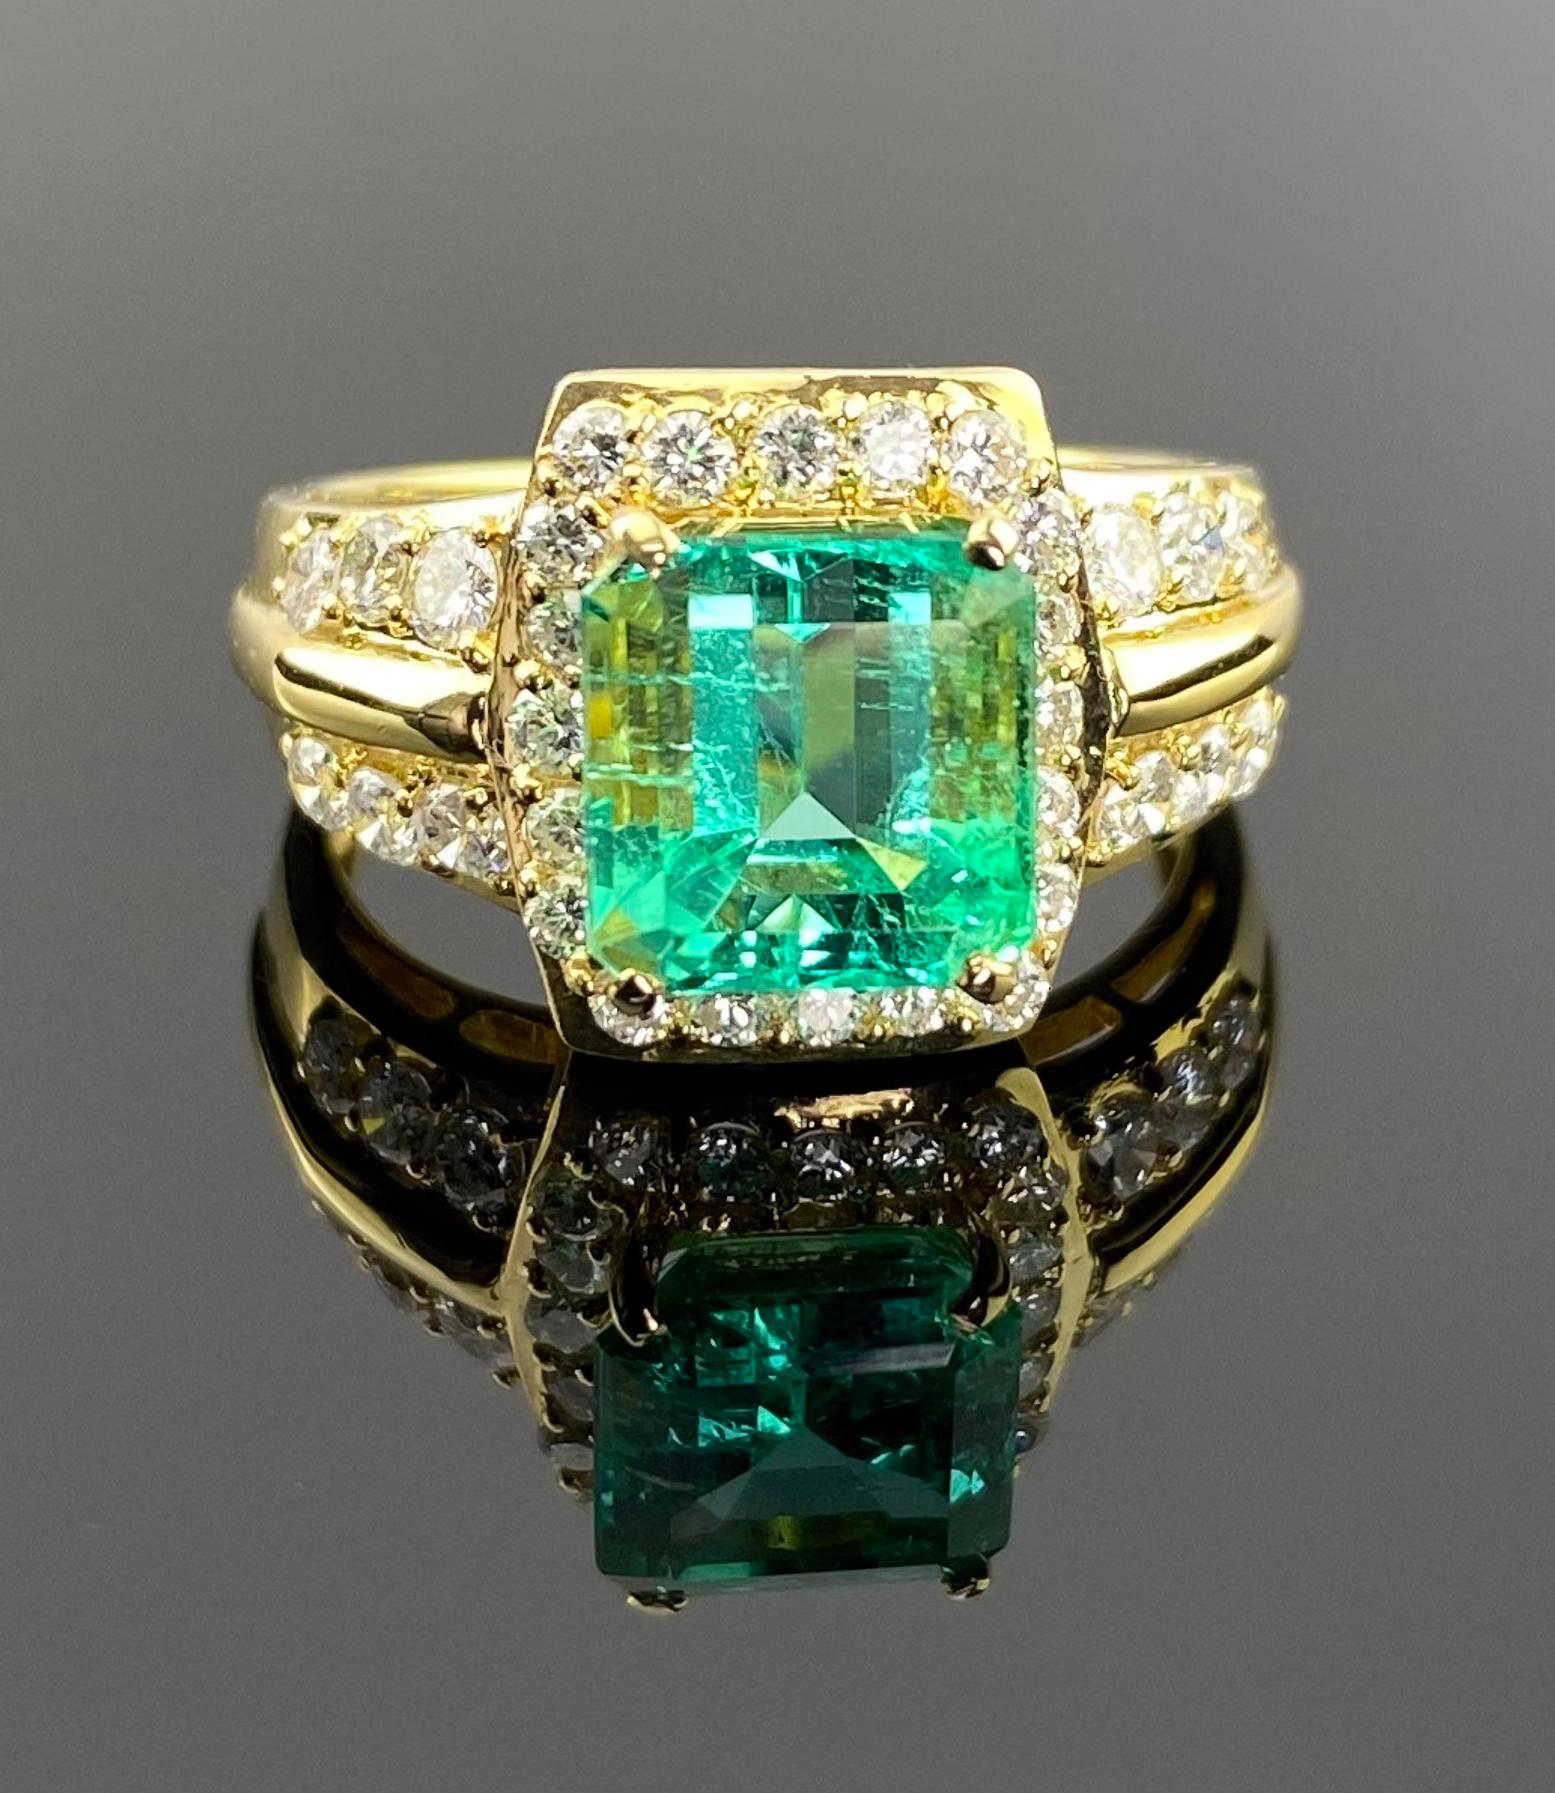 Elegance and sophistication converge in this exquisite white gold ring, adorned with a dazzling square emerald at its center. The striking Colombian Emerald, with its rich green hue, commands attention and is further enhanced by a halo of brilliant